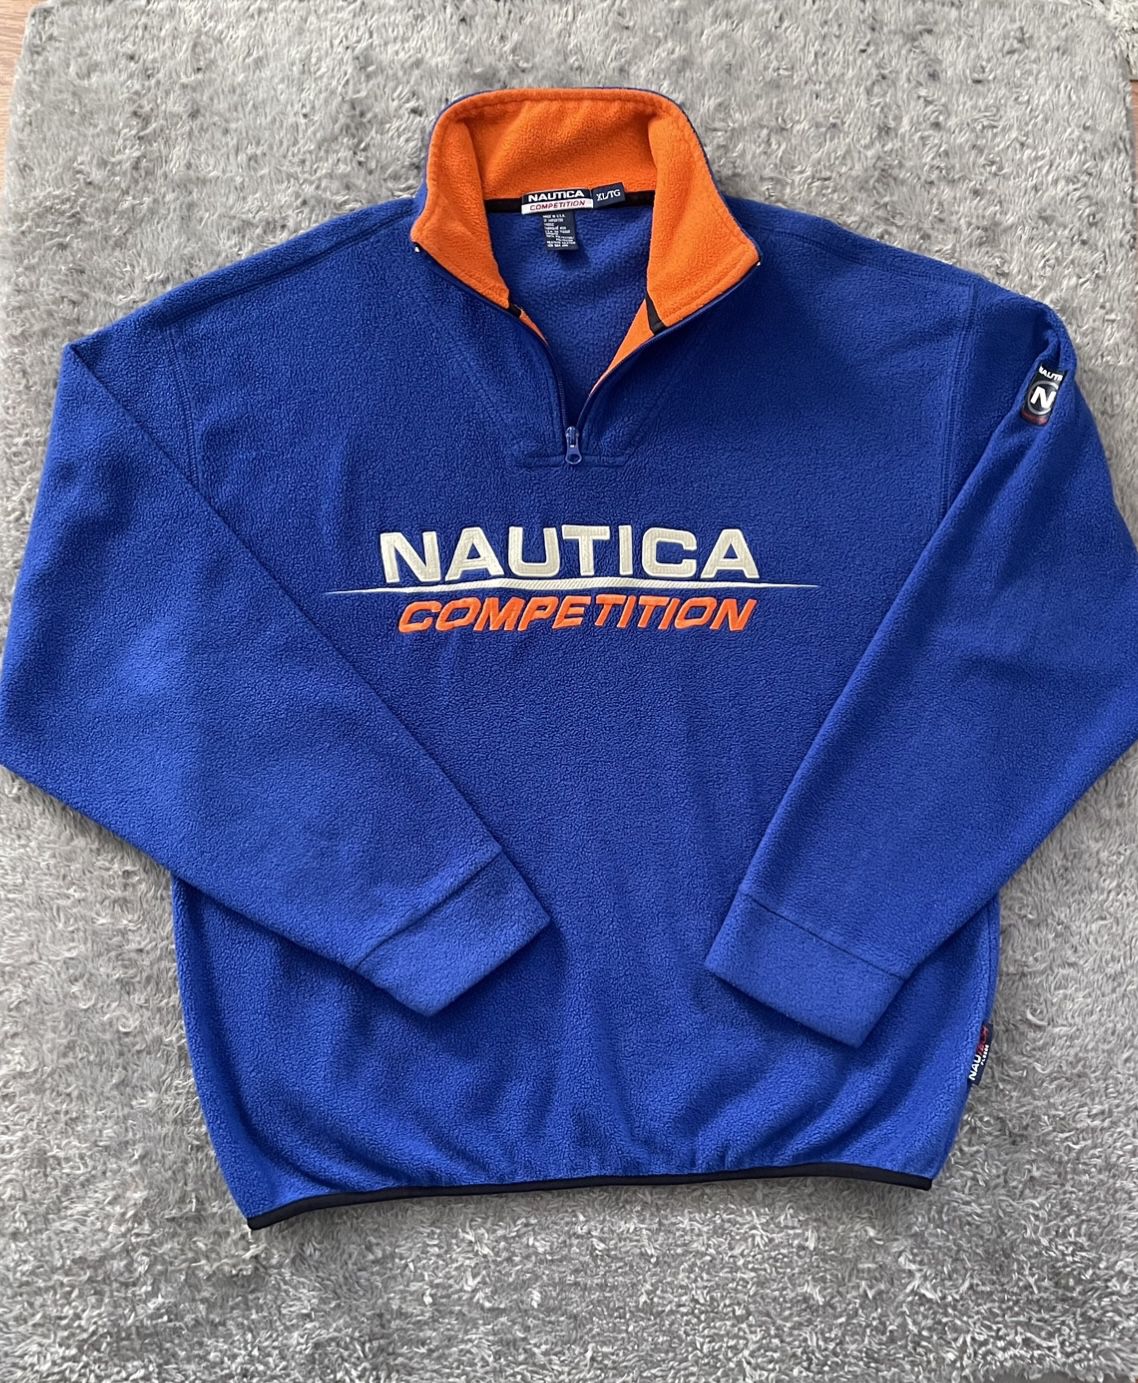 Mens Vintage 90’s Nautica Competition blue fleece pullover 1/4 zip. Size XL. Like New condition Color blue & orange embroidered logo